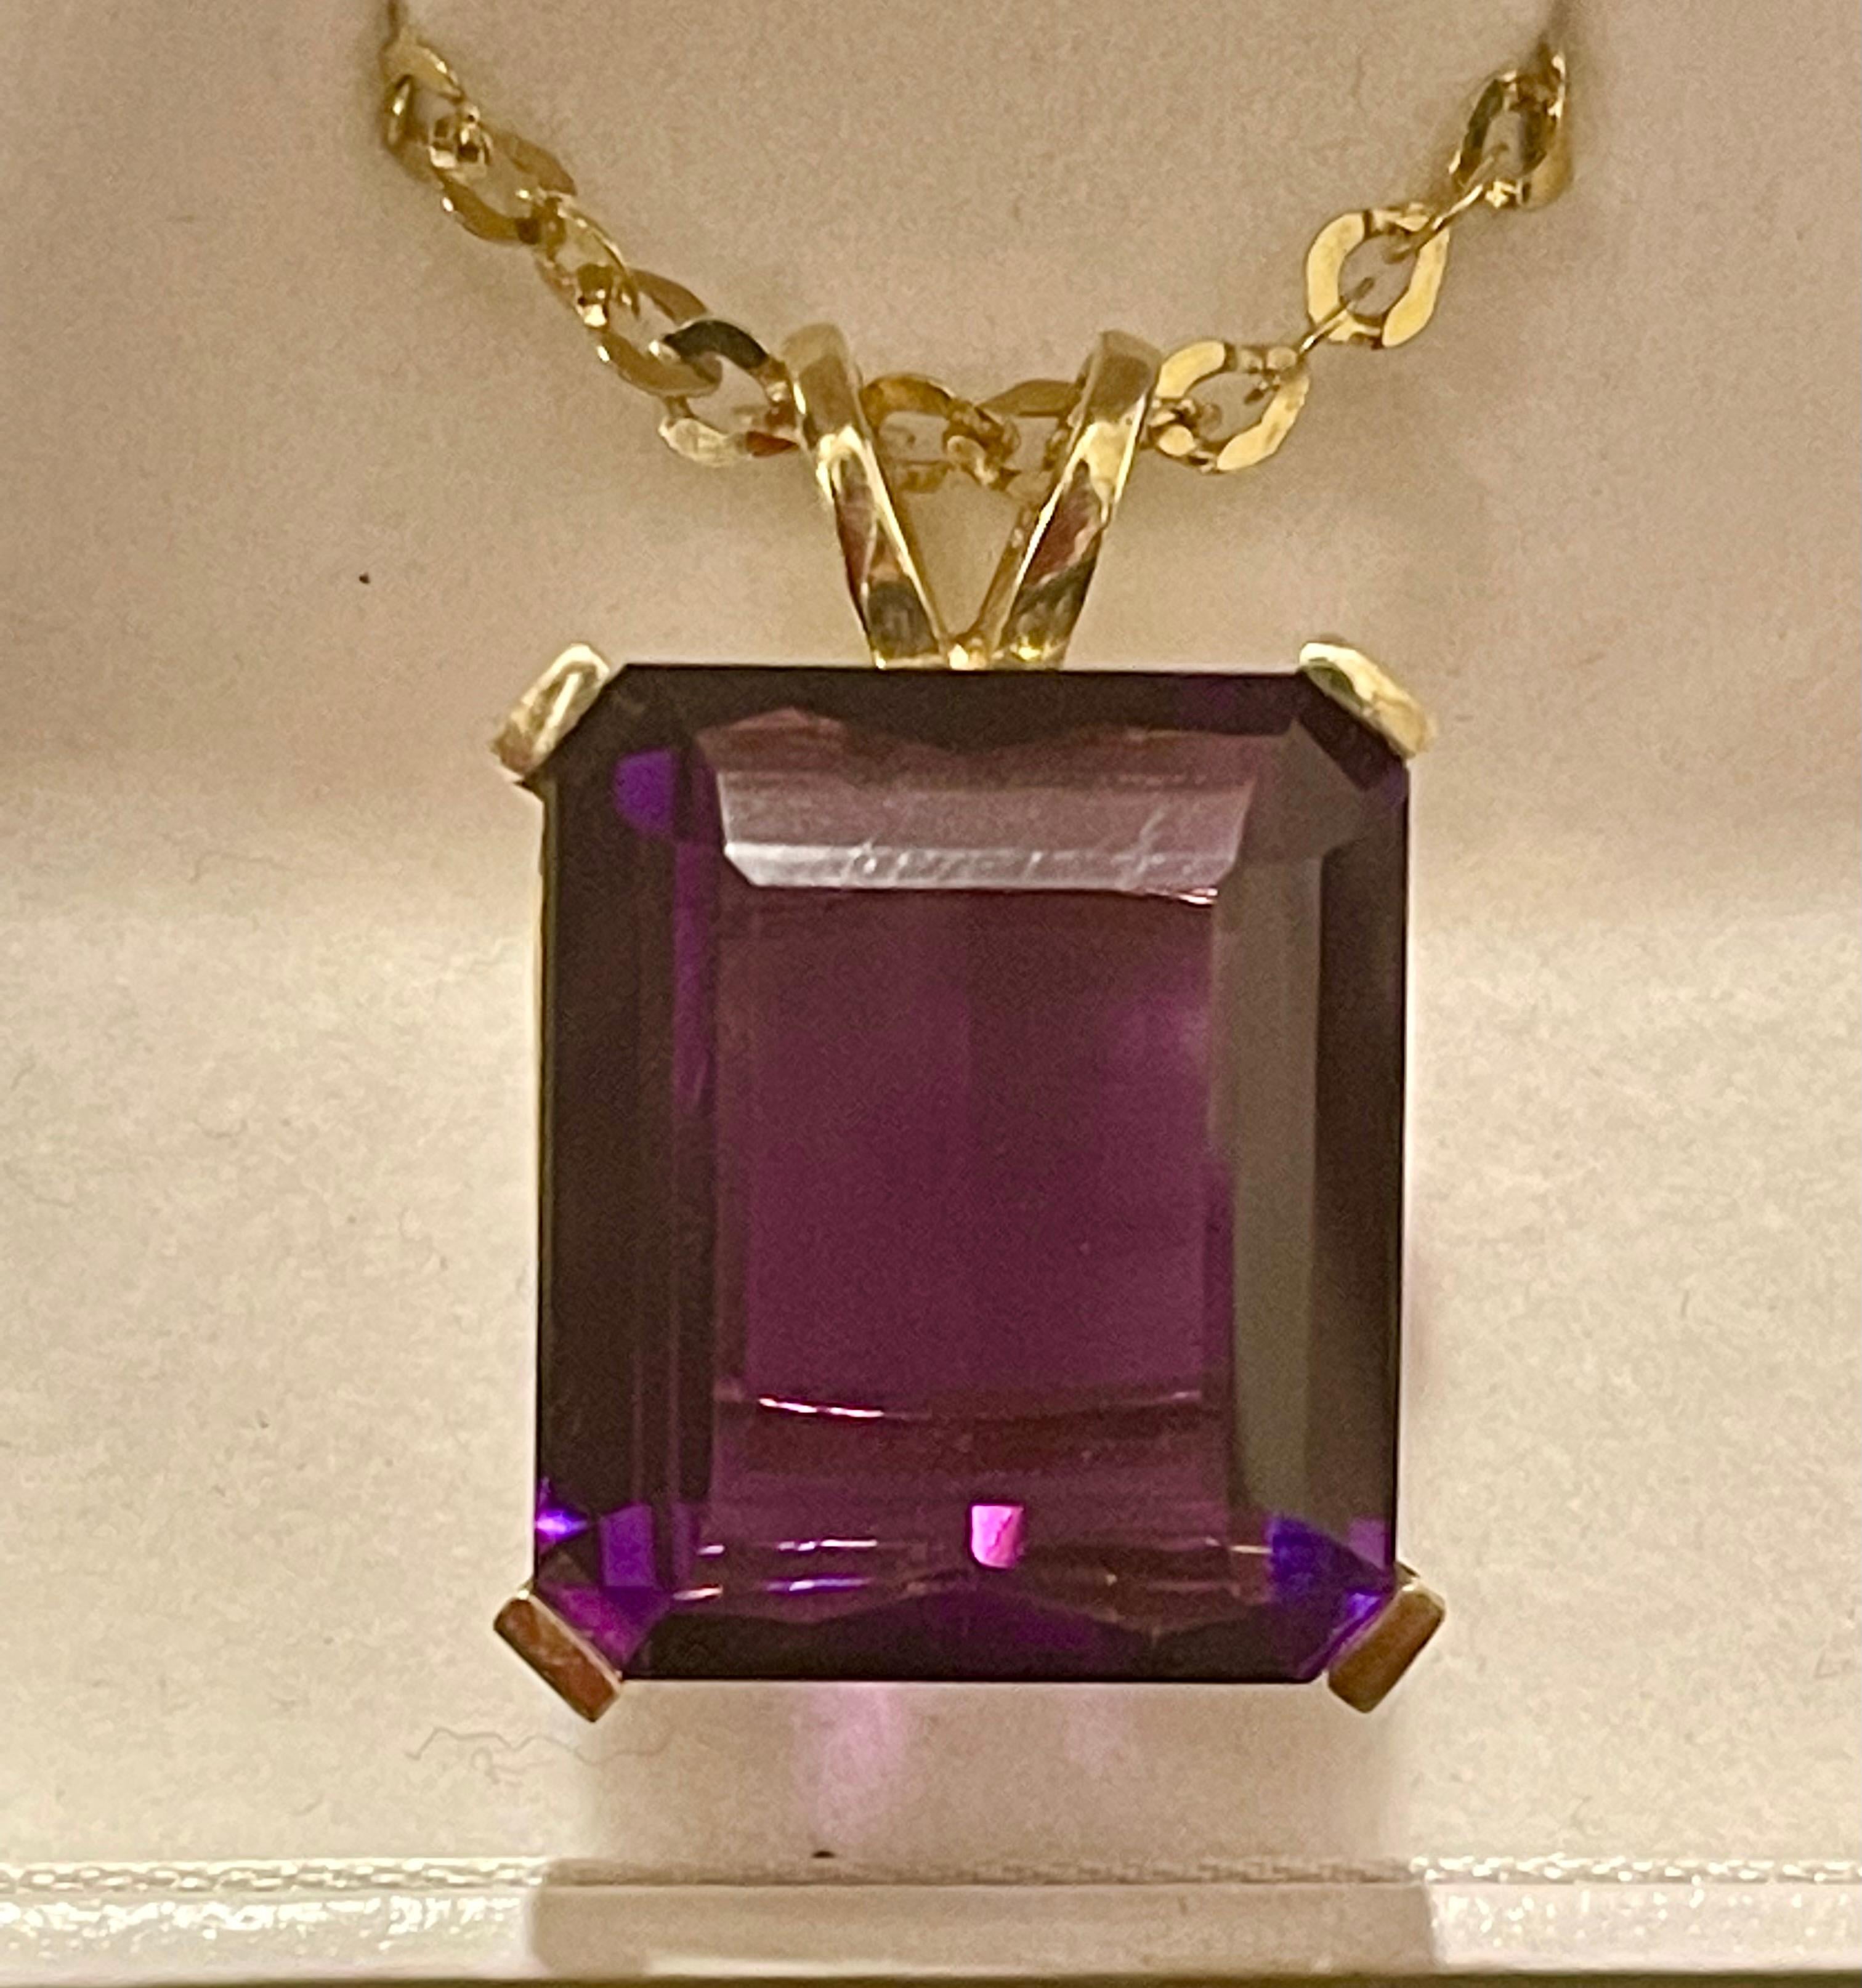 42 Ct Emerald Cut Amethyst Pendant /Necklace + 14 Kt Yellow Gold Chain Vintage 4